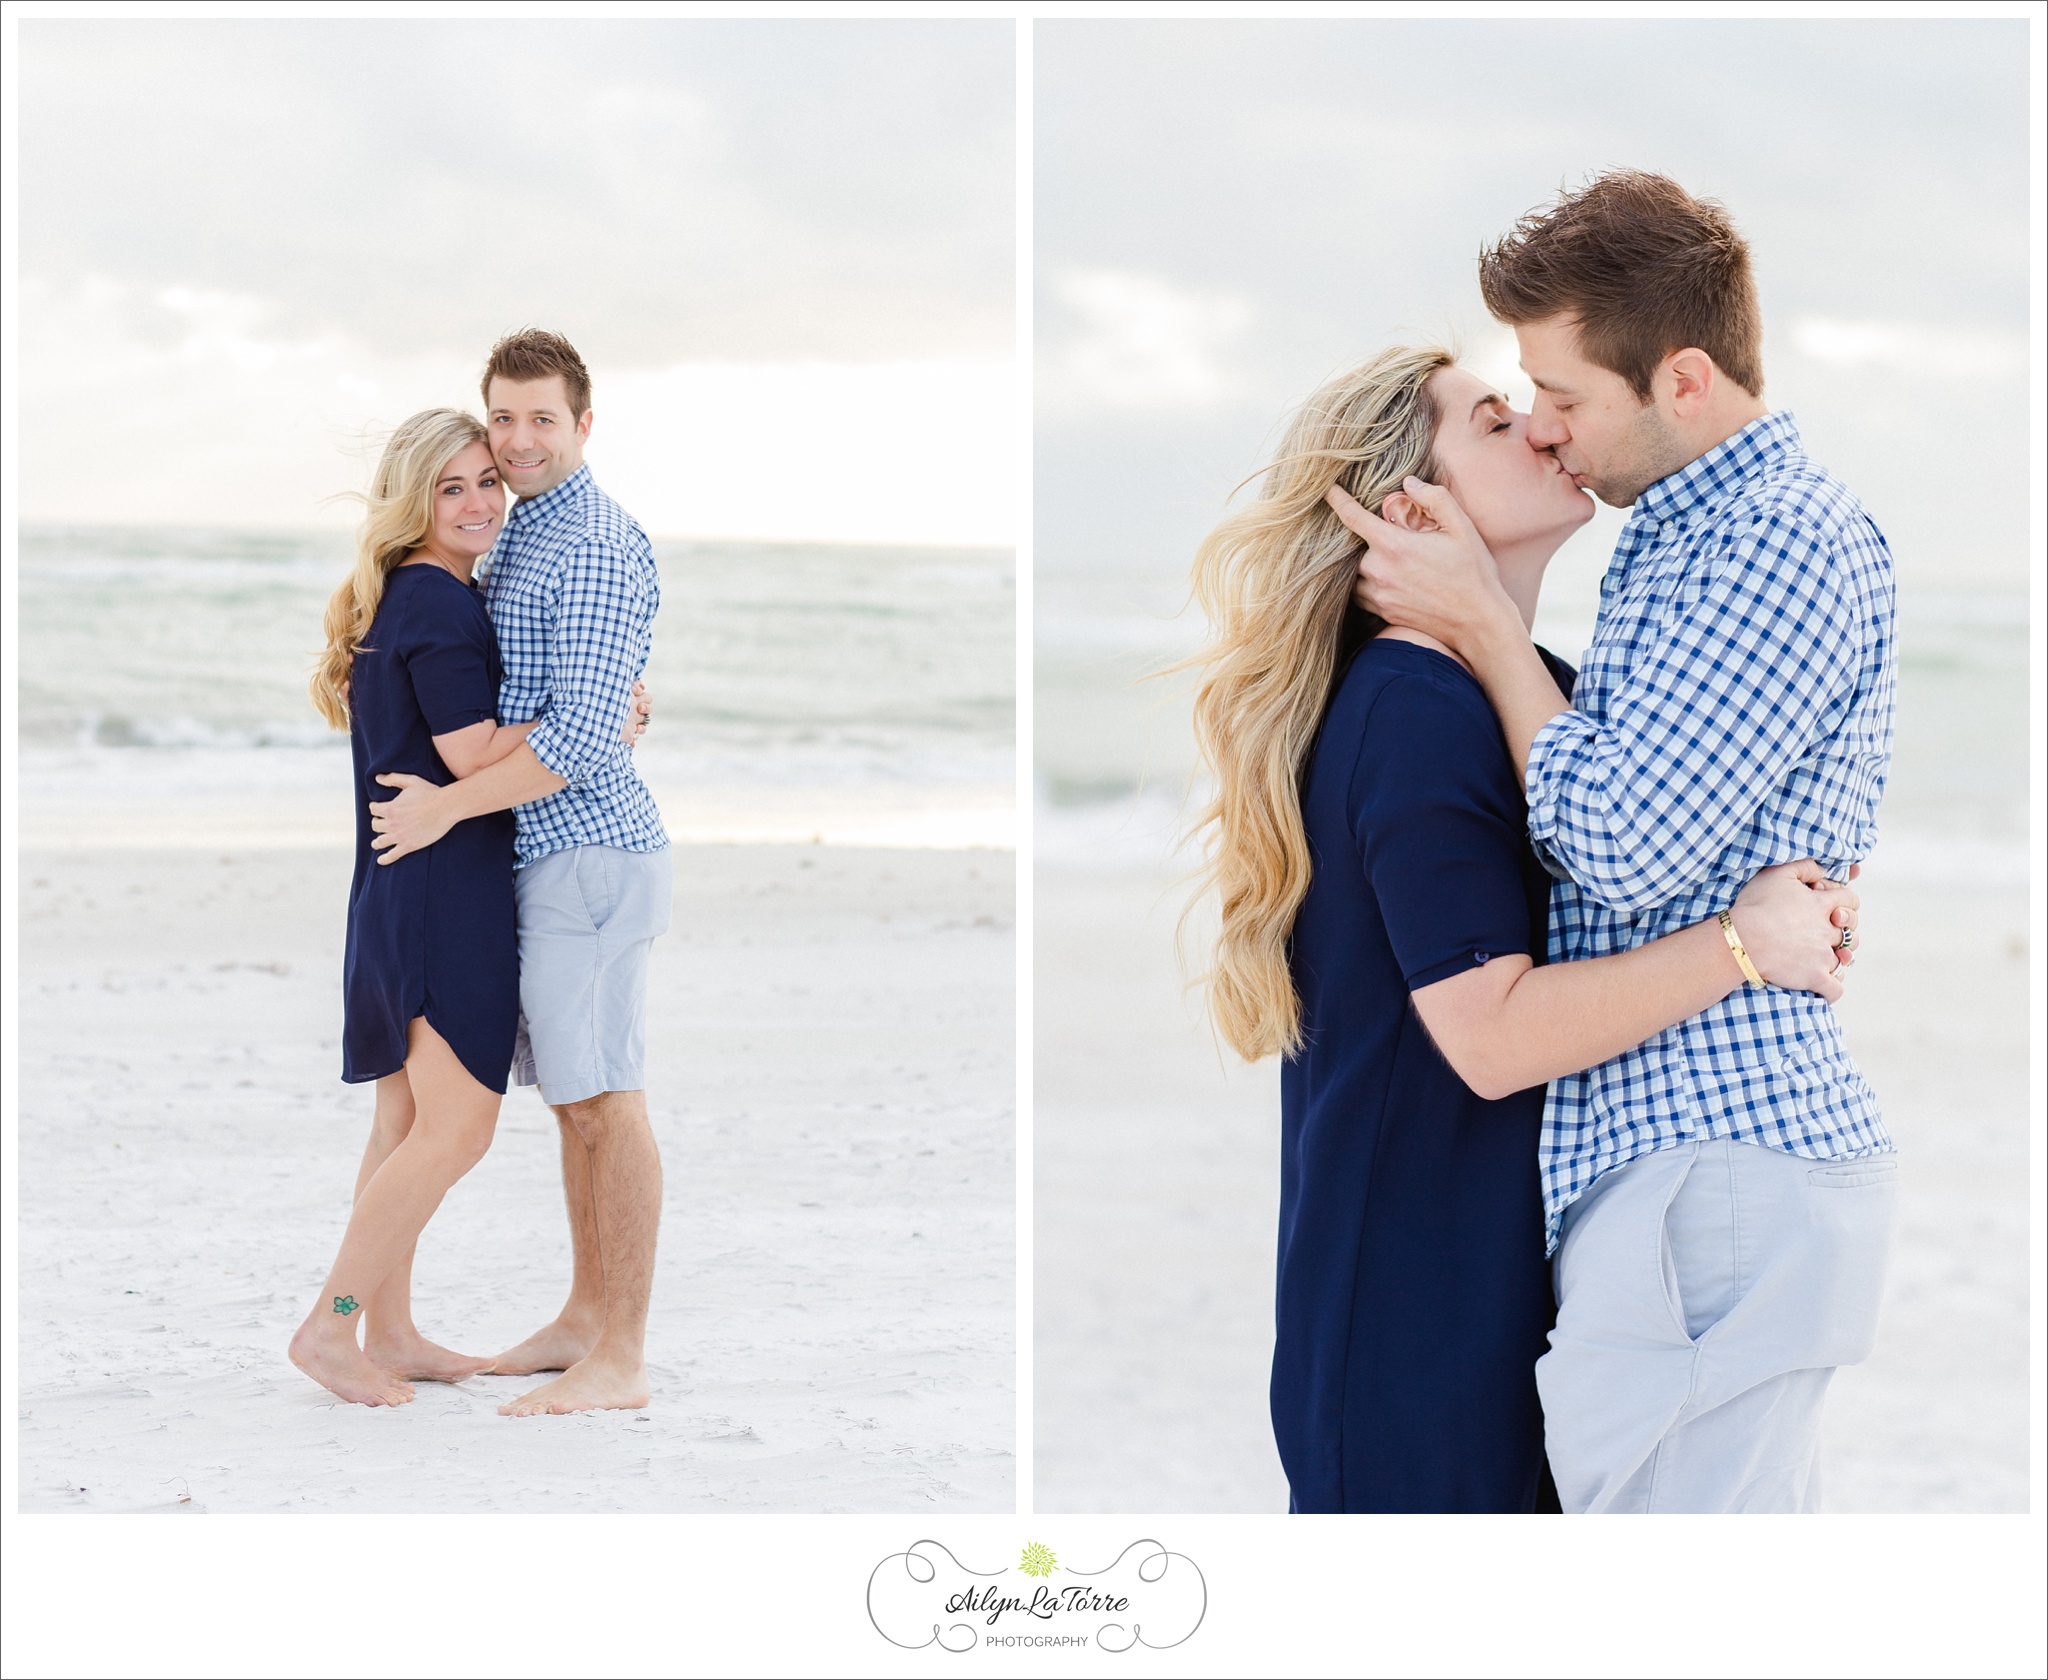 Ringling Museum Engagement | © Ailyn La Torre Photography 2014